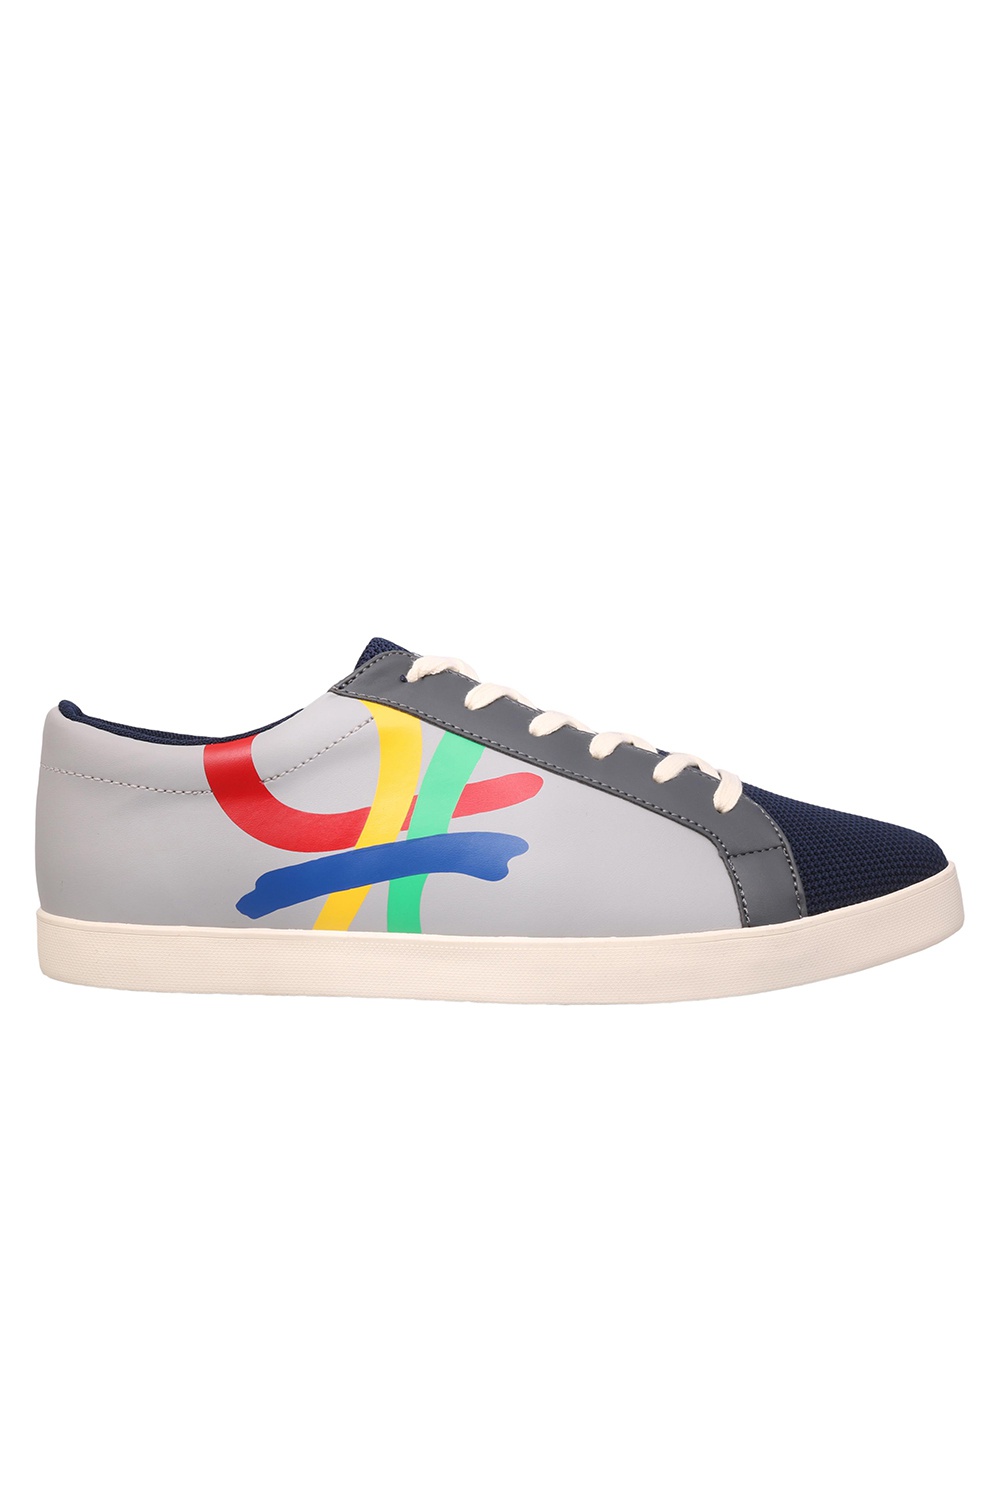 ucb leather sneakers